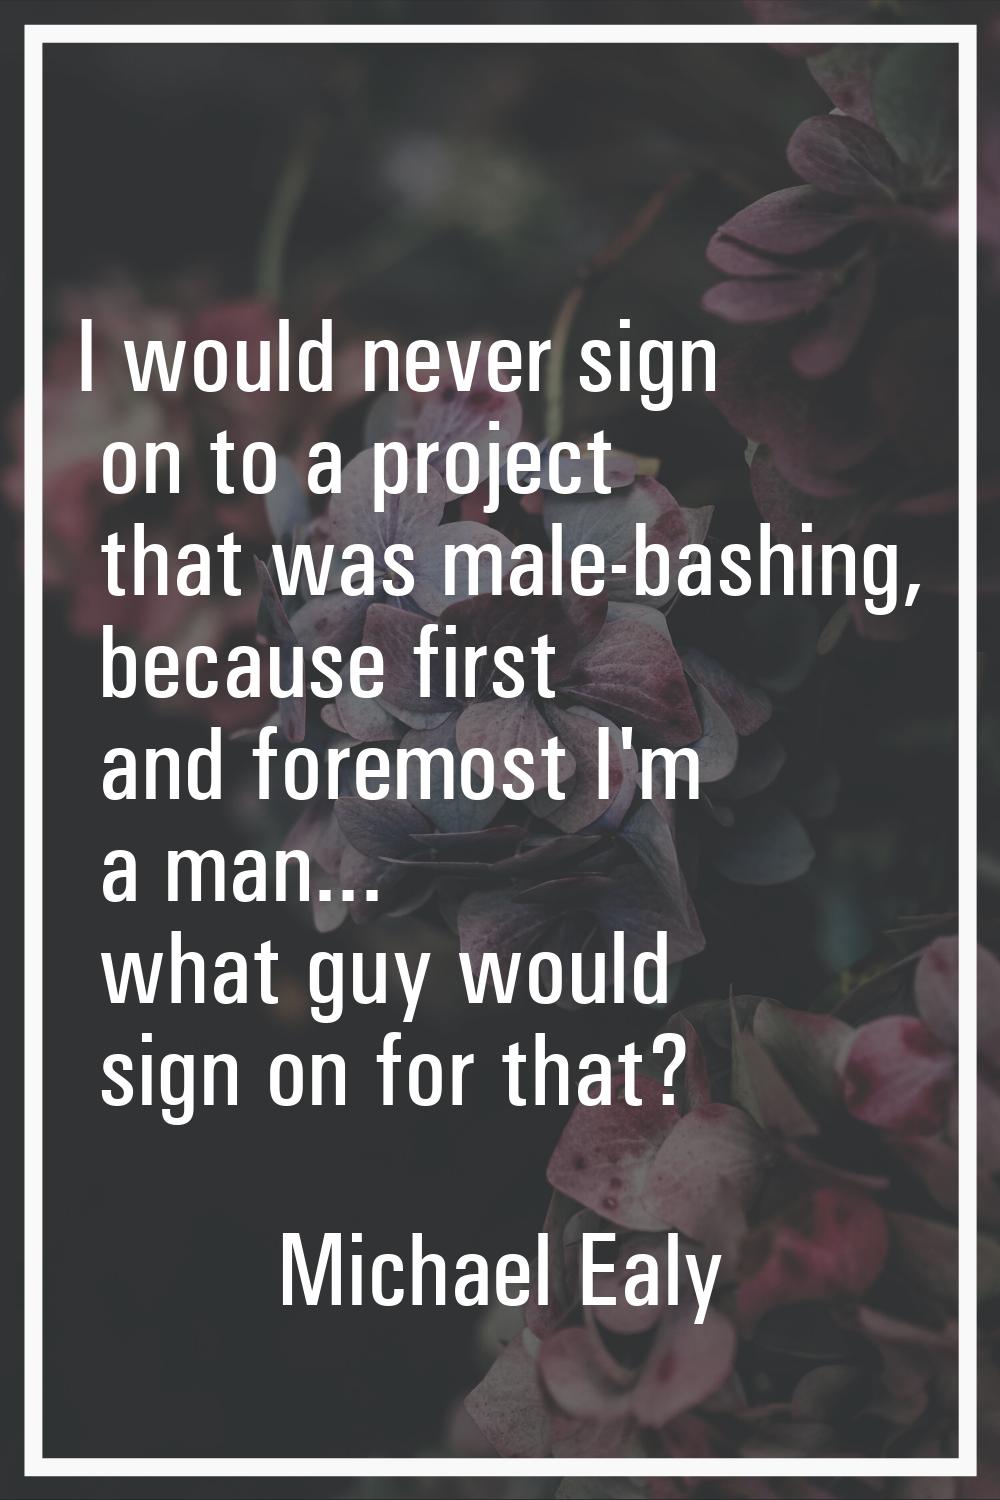 I would never sign on to a project that was male-bashing, because first and foremost I'm a man... w